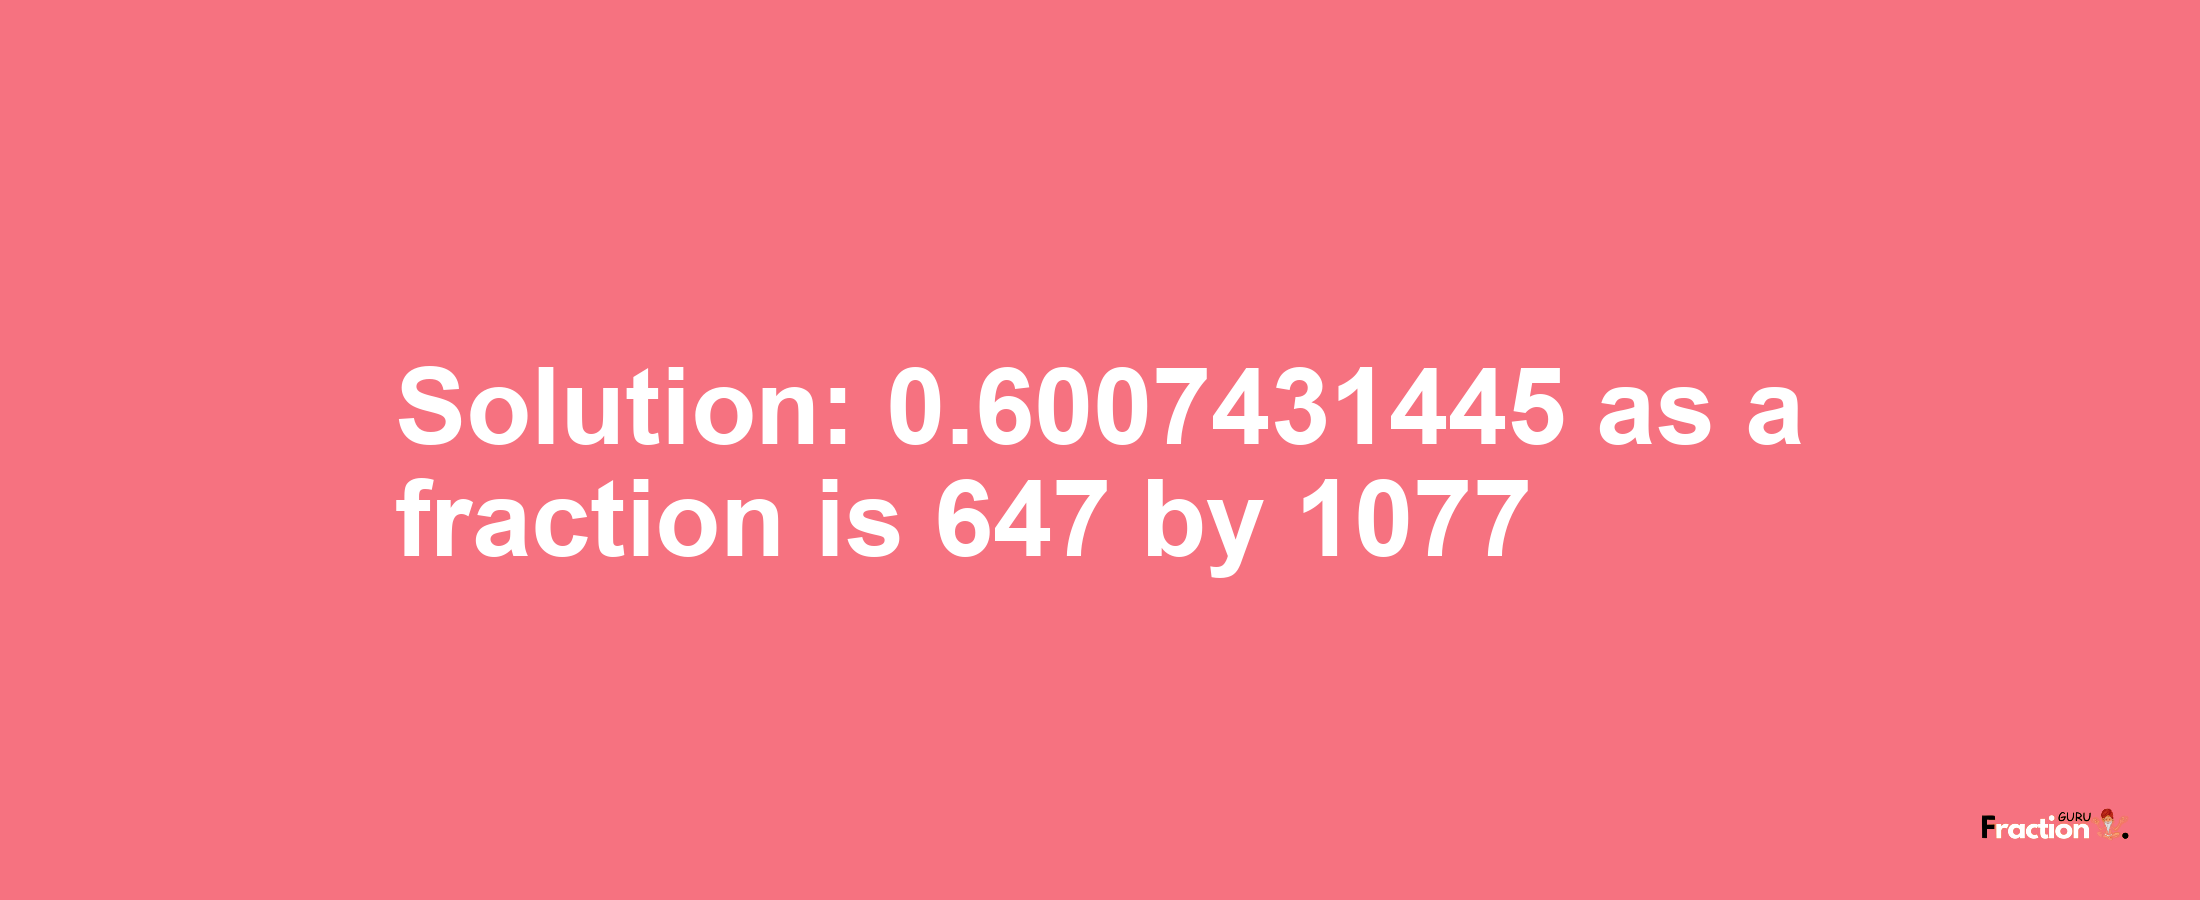 Solution:0.6007431445 as a fraction is 647/1077